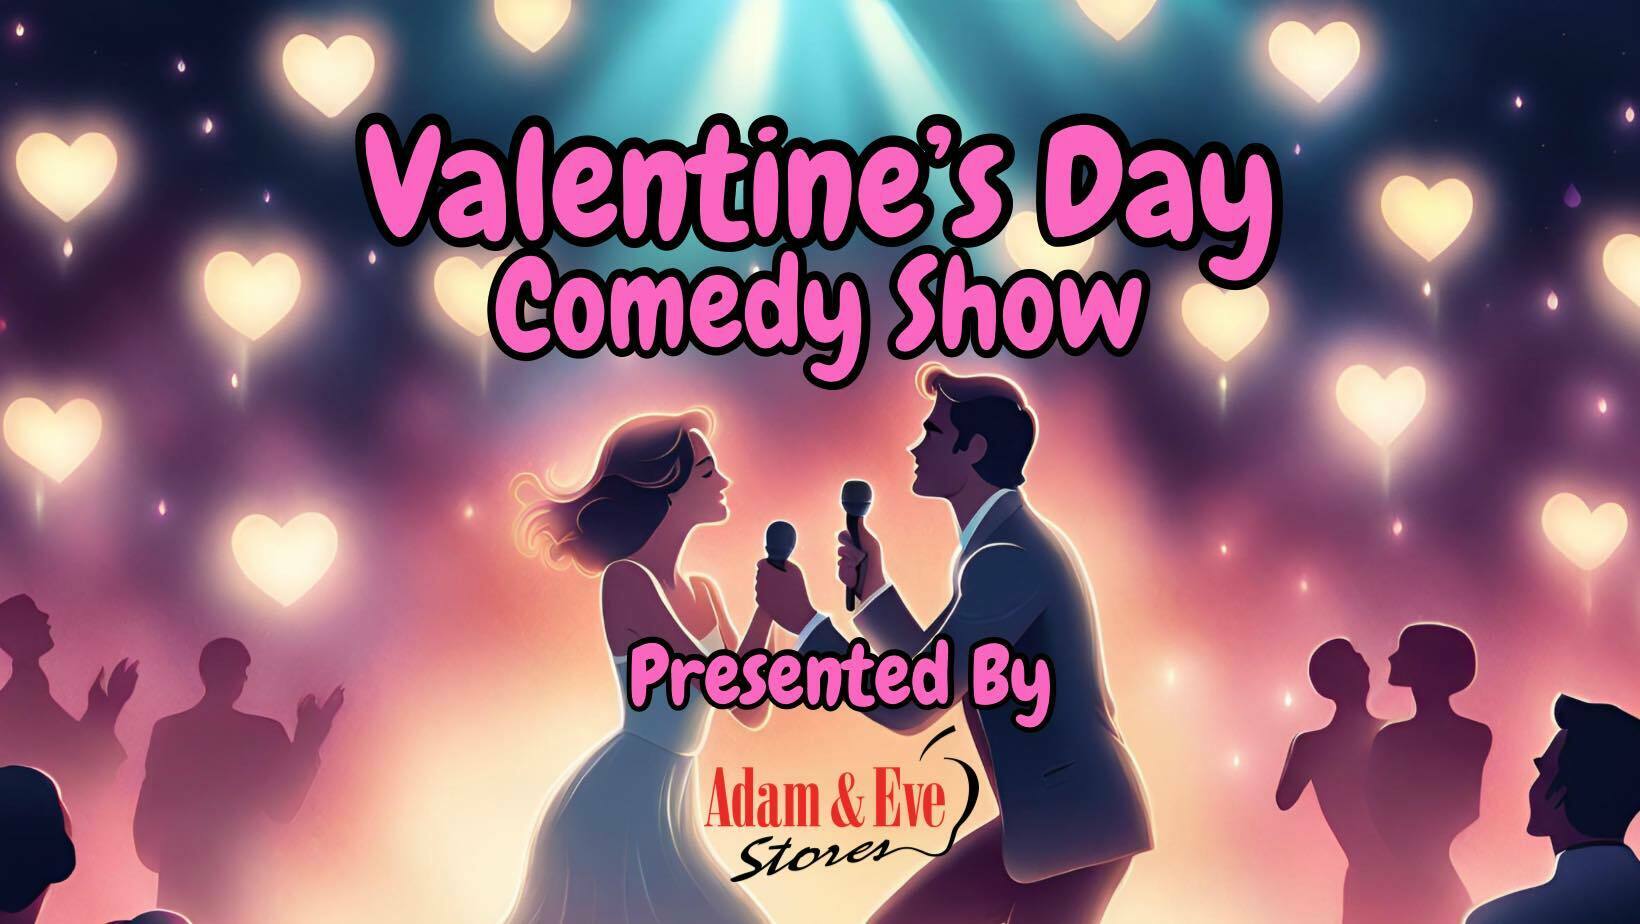 Valentine's Day Comedy Show: Presented by Adam and Eve Stores, Boise, Idaho, United States